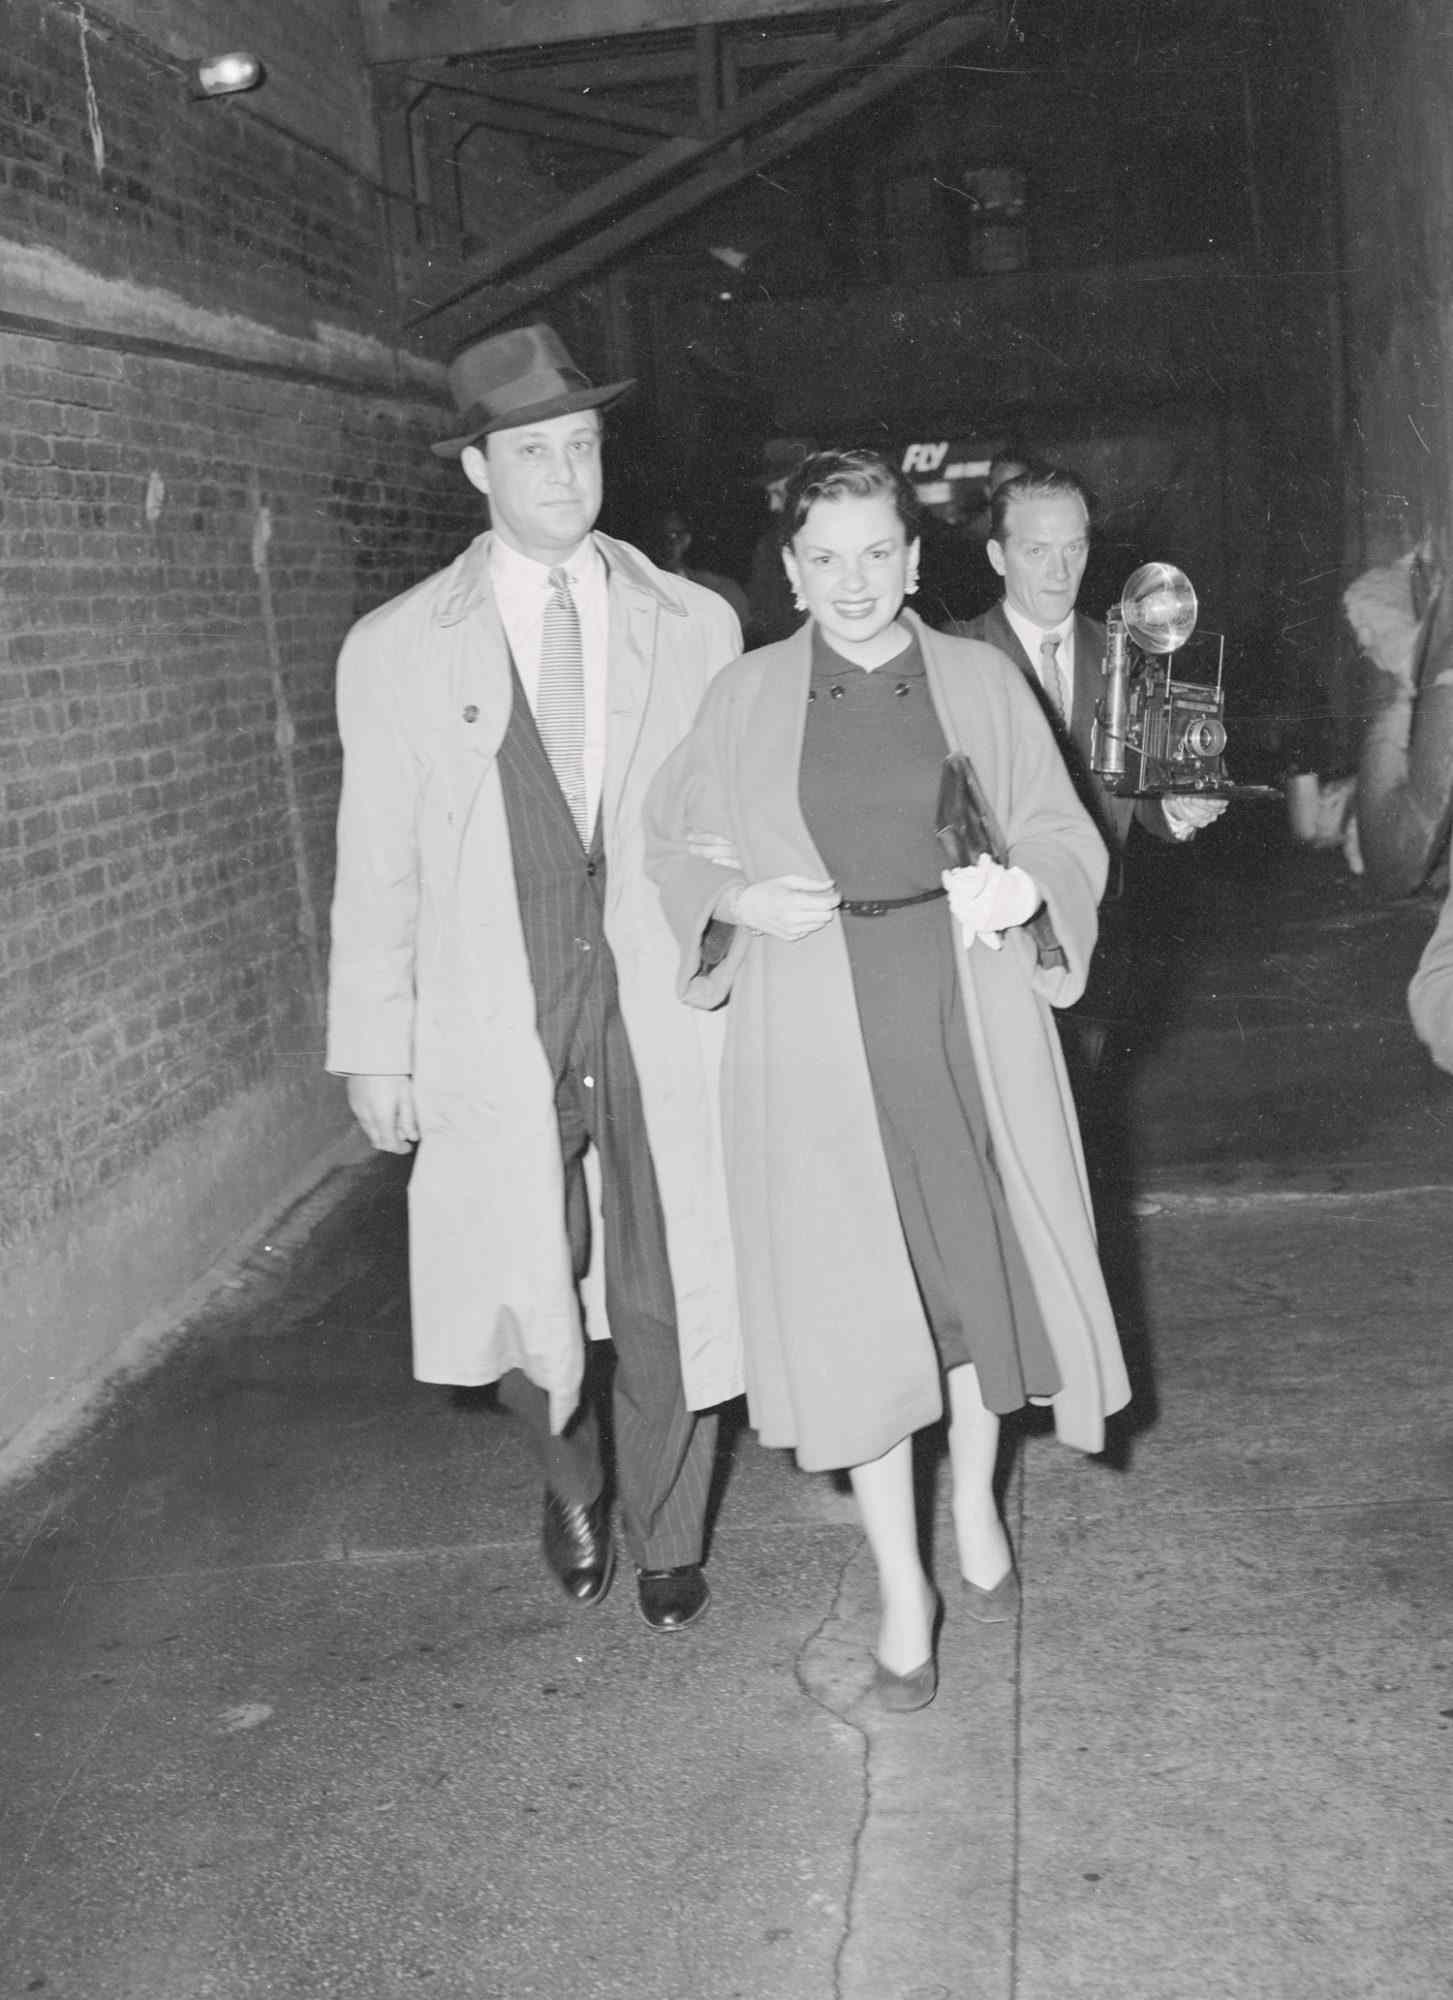 Judy Garland and Sid Luft Entering Theater Entrance